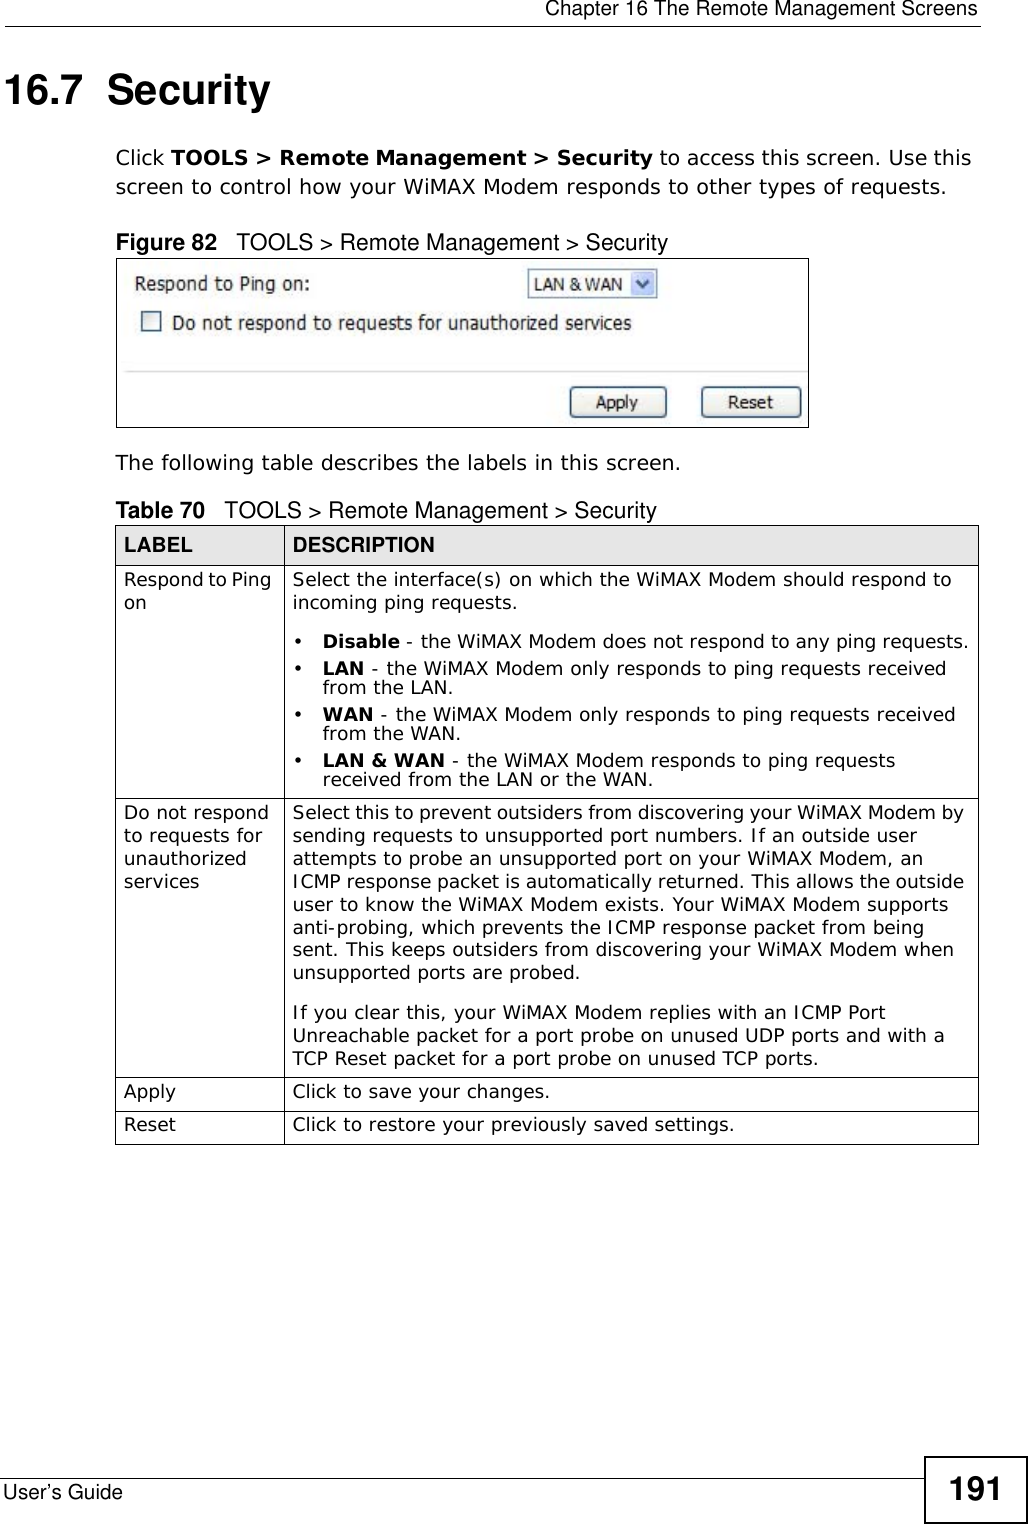  Chapter 16 The Remote Management ScreensUser’s Guide 19116.7  SecurityClick TOOLS &gt; Remote Management &gt; Security to access this screen. Use this screen to control how your WiMAX Modem responds to other types of requests.Figure 82   TOOLS &gt; Remote Management &gt; SecurityThe following table describes the labels in this screen.Table 70   TOOLS &gt; Remote Management &gt; SecurityLABEL DESCRIPTIONRespond to Ping on Select the interface(s) on which the WiMAX Modem should respond to incoming ping requests.•Disable - the WiMAX Modem does not respond to any ping requests.•LAN - the WiMAX Modem only responds to ping requests received from the LAN.•WAN - the WiMAX Modem only responds to ping requests received from the WAN.•LAN &amp; WAN - the WiMAX Modem responds to ping requests received from the LAN or the WAN.Do not respond to requests for unauthorized servicesSelect this to prevent outsiders from discovering your WiMAX Modem by sending requests to unsupported port numbers. If an outside user attempts to probe an unsupported port on your WiMAX Modem, an ICMP response packet is automatically returned. This allows the outside user to know the WiMAX Modem exists. Your WiMAX Modem supports anti-probing, which prevents the ICMP response packet from being sent. This keeps outsiders from discovering your WiMAX Modem when unsupported ports are probed.If you clear this, your WiMAX Modem replies with an ICMP Port Unreachable packet for a port probe on unused UDP ports and with a TCP Reset packet for a port probe on unused TCP ports. Apply Click to save your changes.Reset Click to restore your previously saved settings.